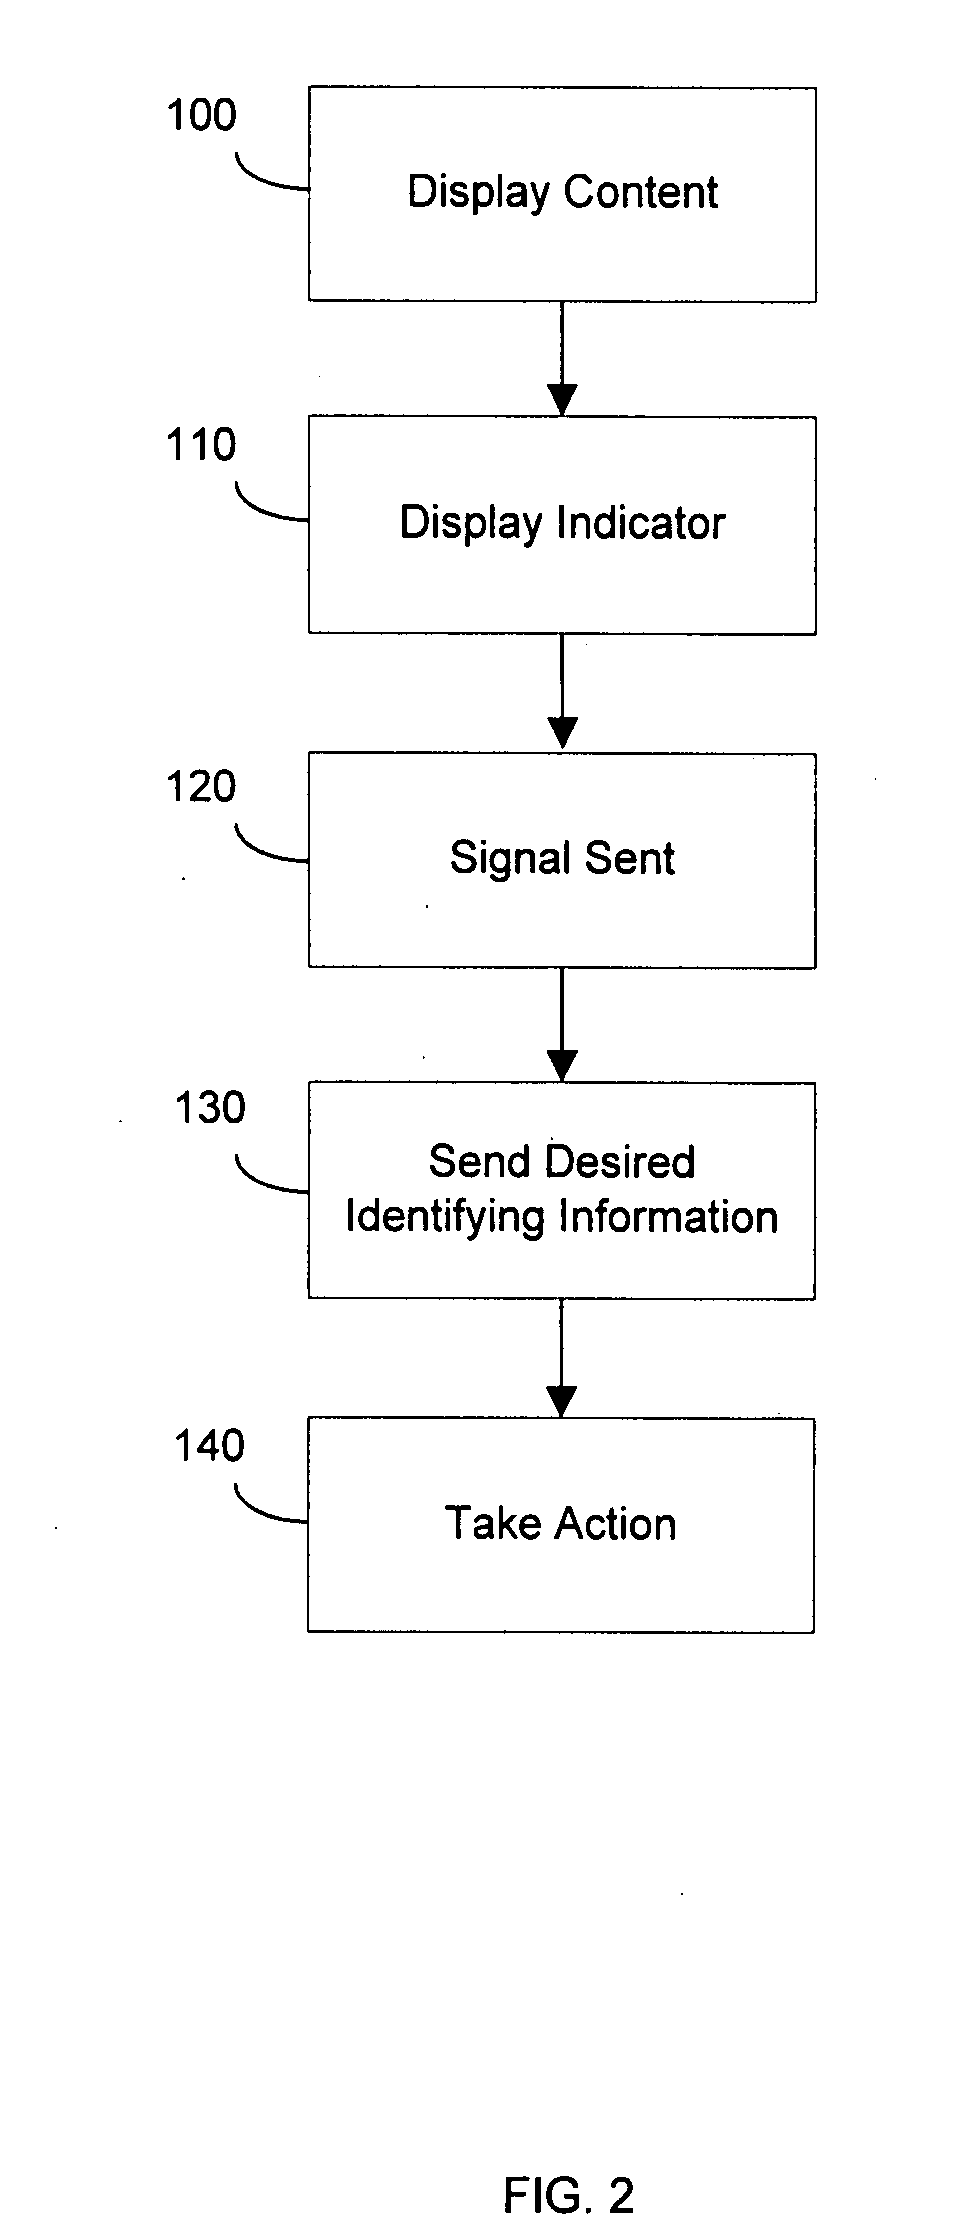 Computer implemented interactive advertising system and method